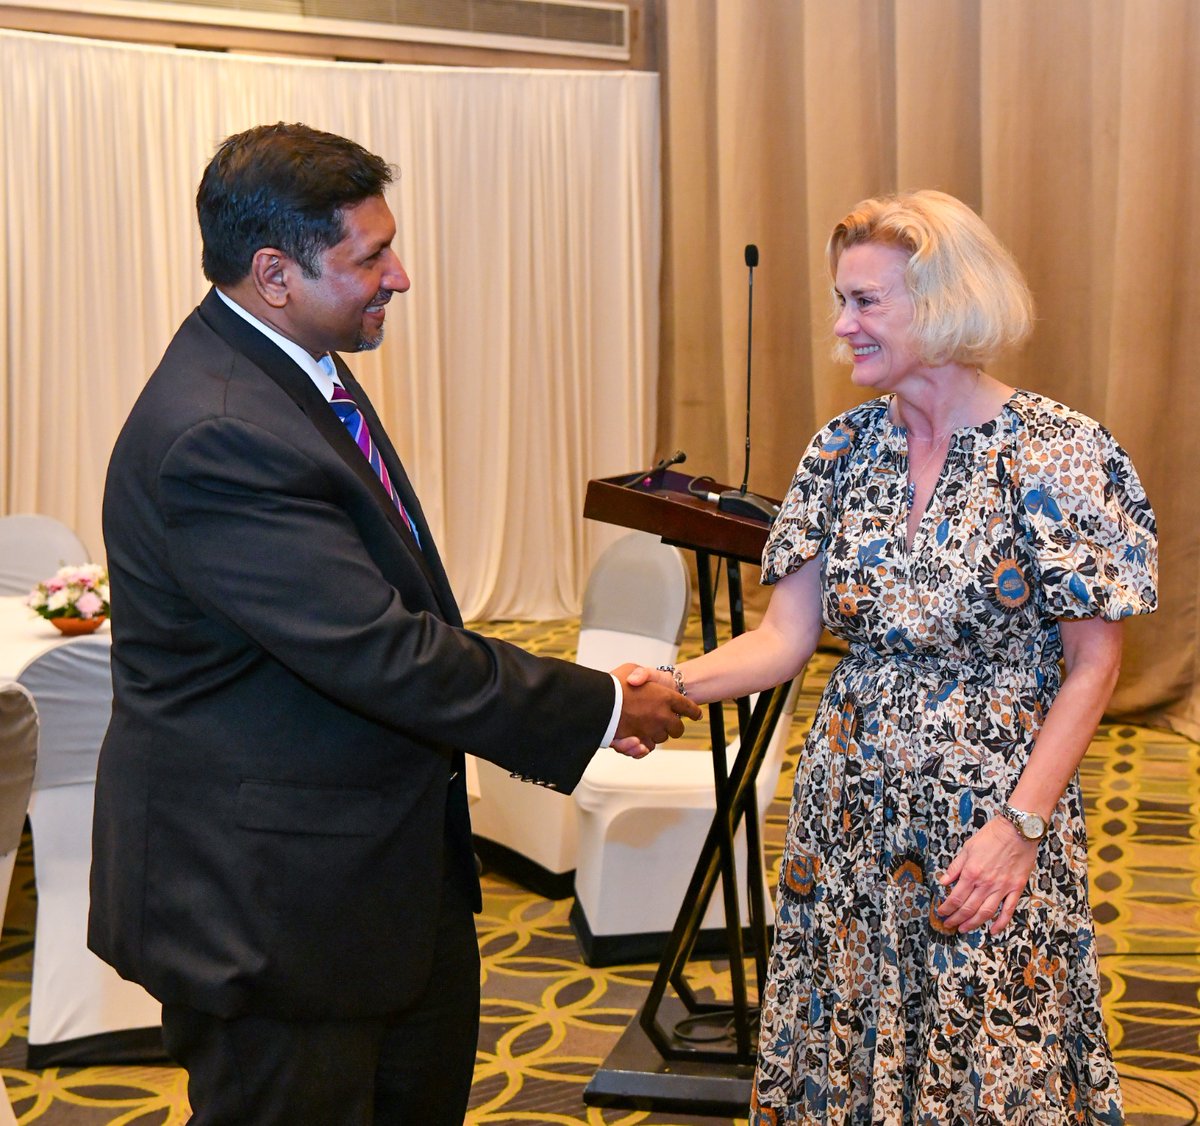 The Norwegian Hon Consul Gen to SL office was officially opened on Nov 8th, and the Norwegian Honorary Consulate of SL hosted a function at the Hilton last Tue (07). HE Norw. Amb. to Ind. and SL @MayElinStener  and Honorary Consul General to SL Hon. @ManoSeky  hosted the event.